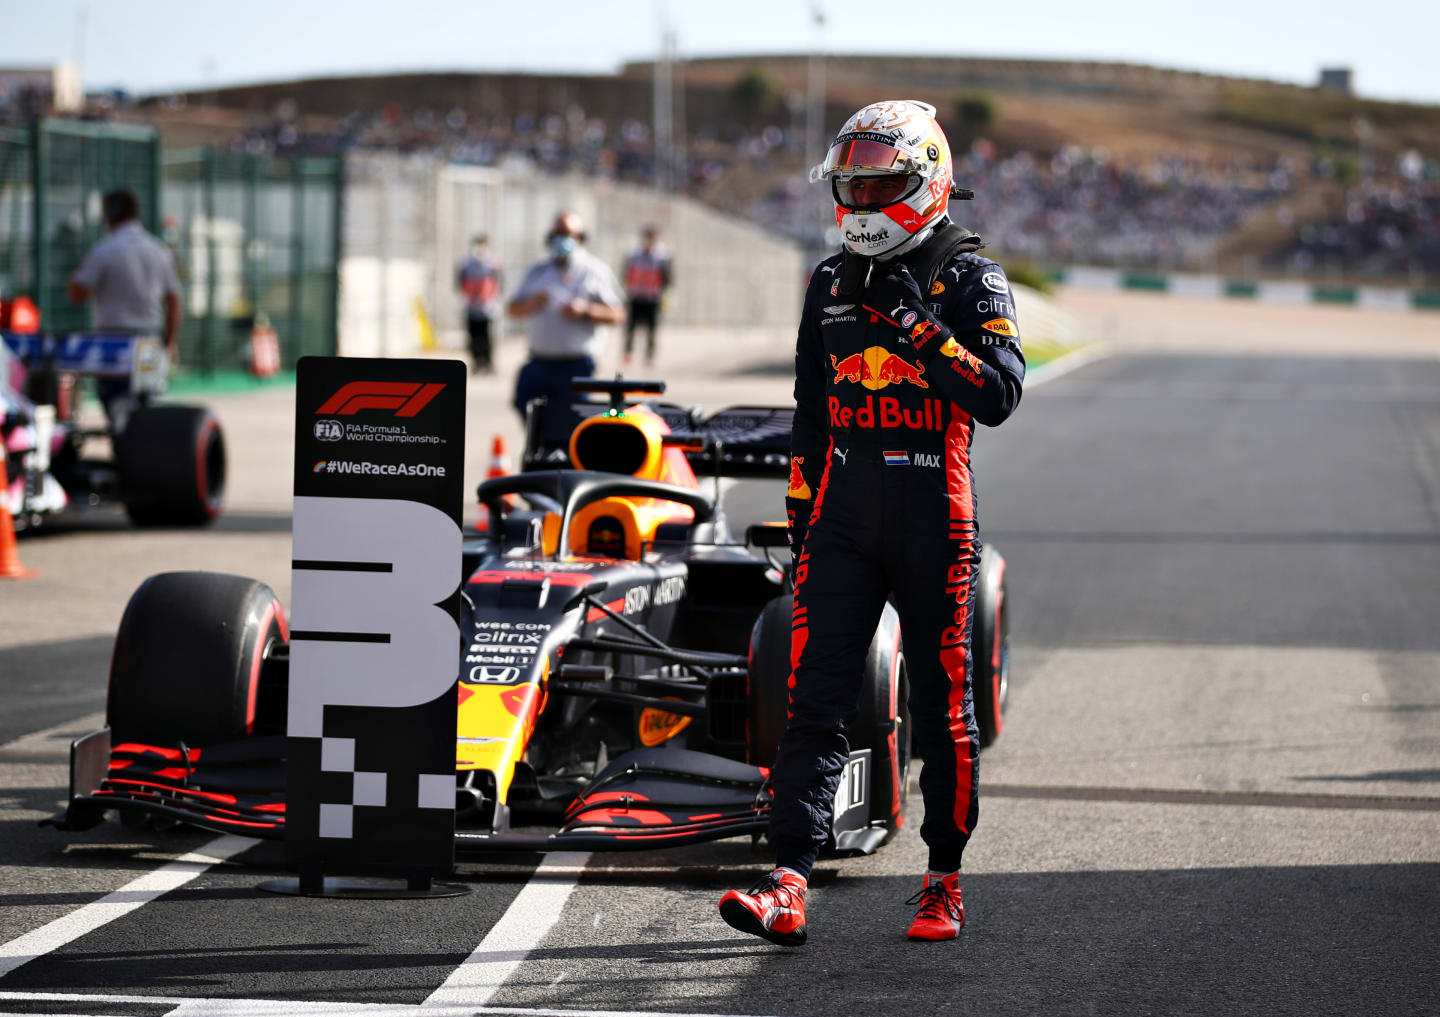 PORTIMAO, PORTUGAL - OCTOBER 24: Third place qualifier Max Verstappen of Netherlands and Red Bull Racing walks from his car in parc ferme during qualifying ahead of the F1 Grand Prix of Portugal at Autodromo Internacional do Algarve on October 24, 2020 in Portimao, Portugal. (Photo by Mark Thompson/Getty Images)